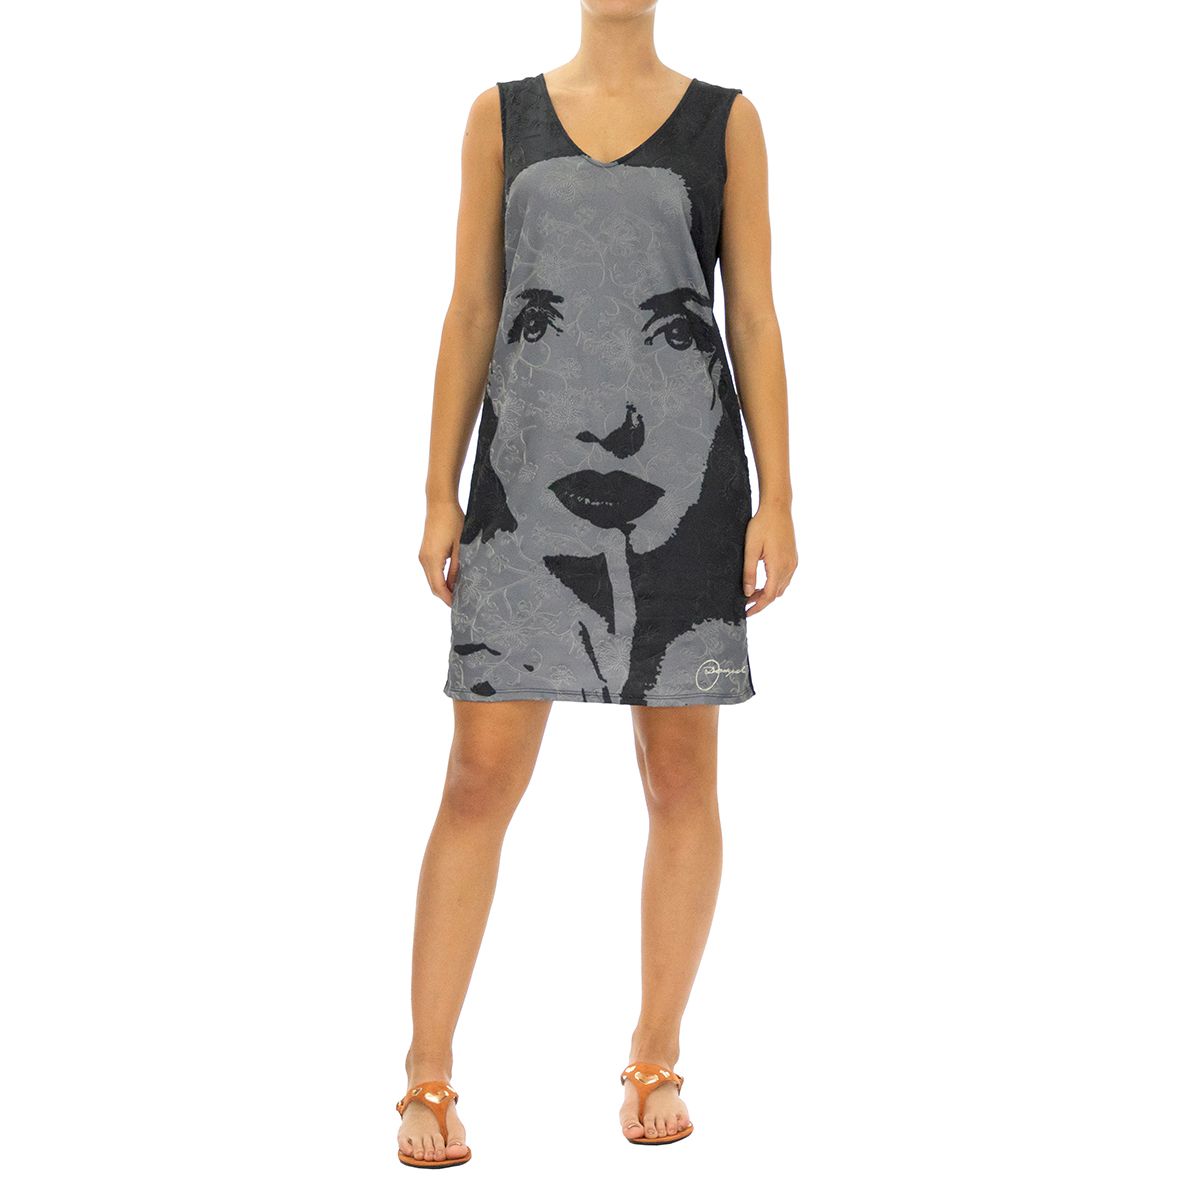 Desigual 46V2055-2020-L The details on this dress will add an extra touch to your day look.